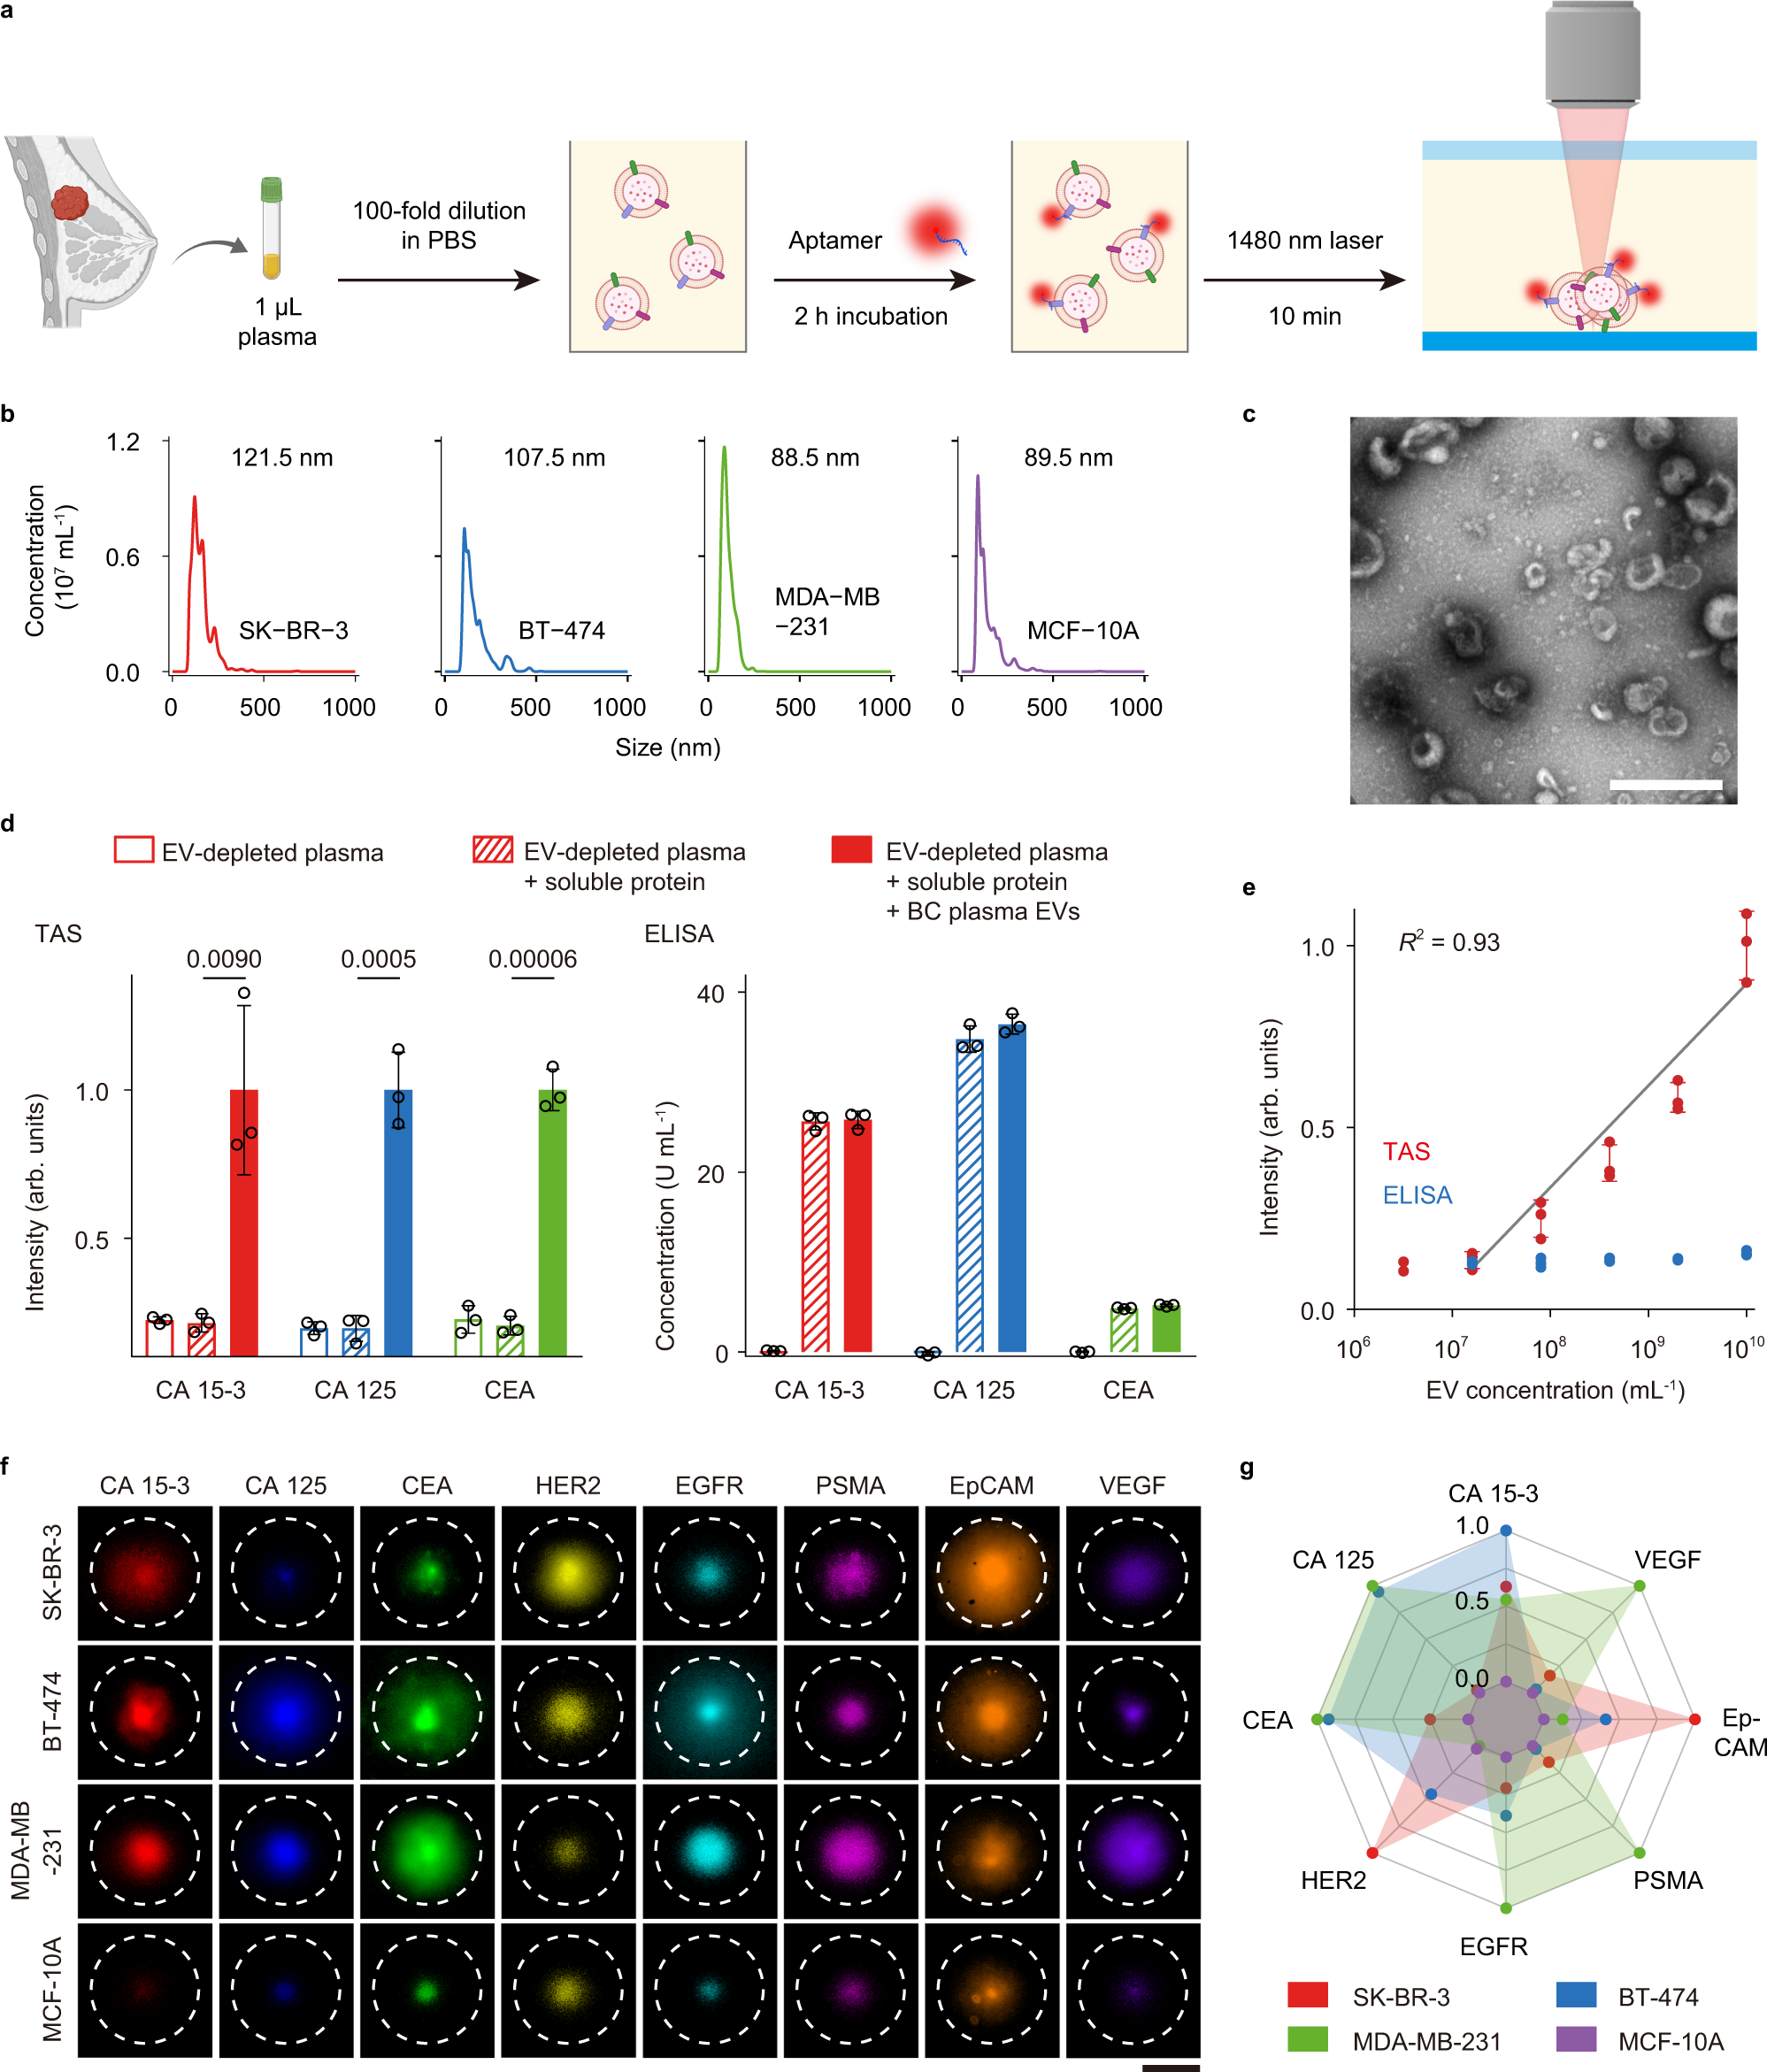 Protein analysis of extracellular vesicles to monitor and predict  therapeutic response in metastatic breast cancer | Nature Communications